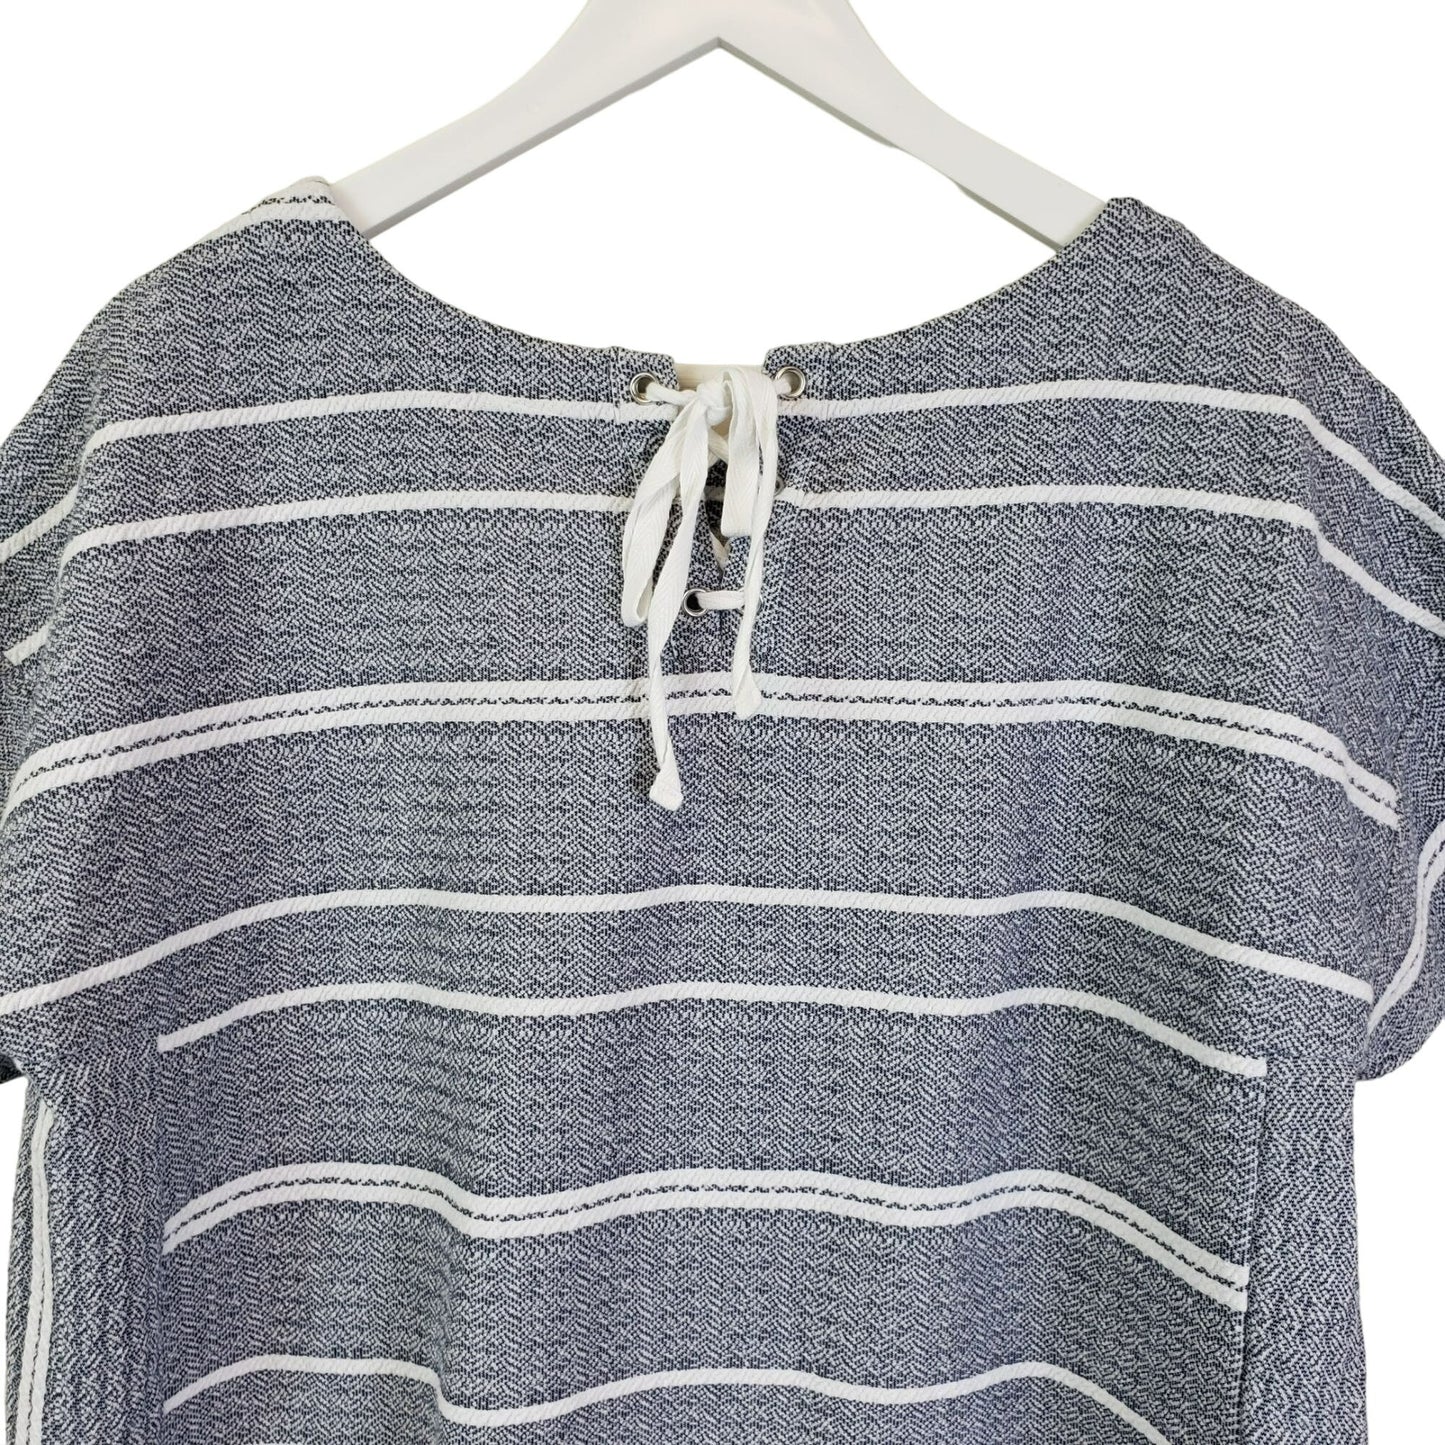 Chico's Weekends Striped Textured Top with Lace-Up Back Size Chico's 2